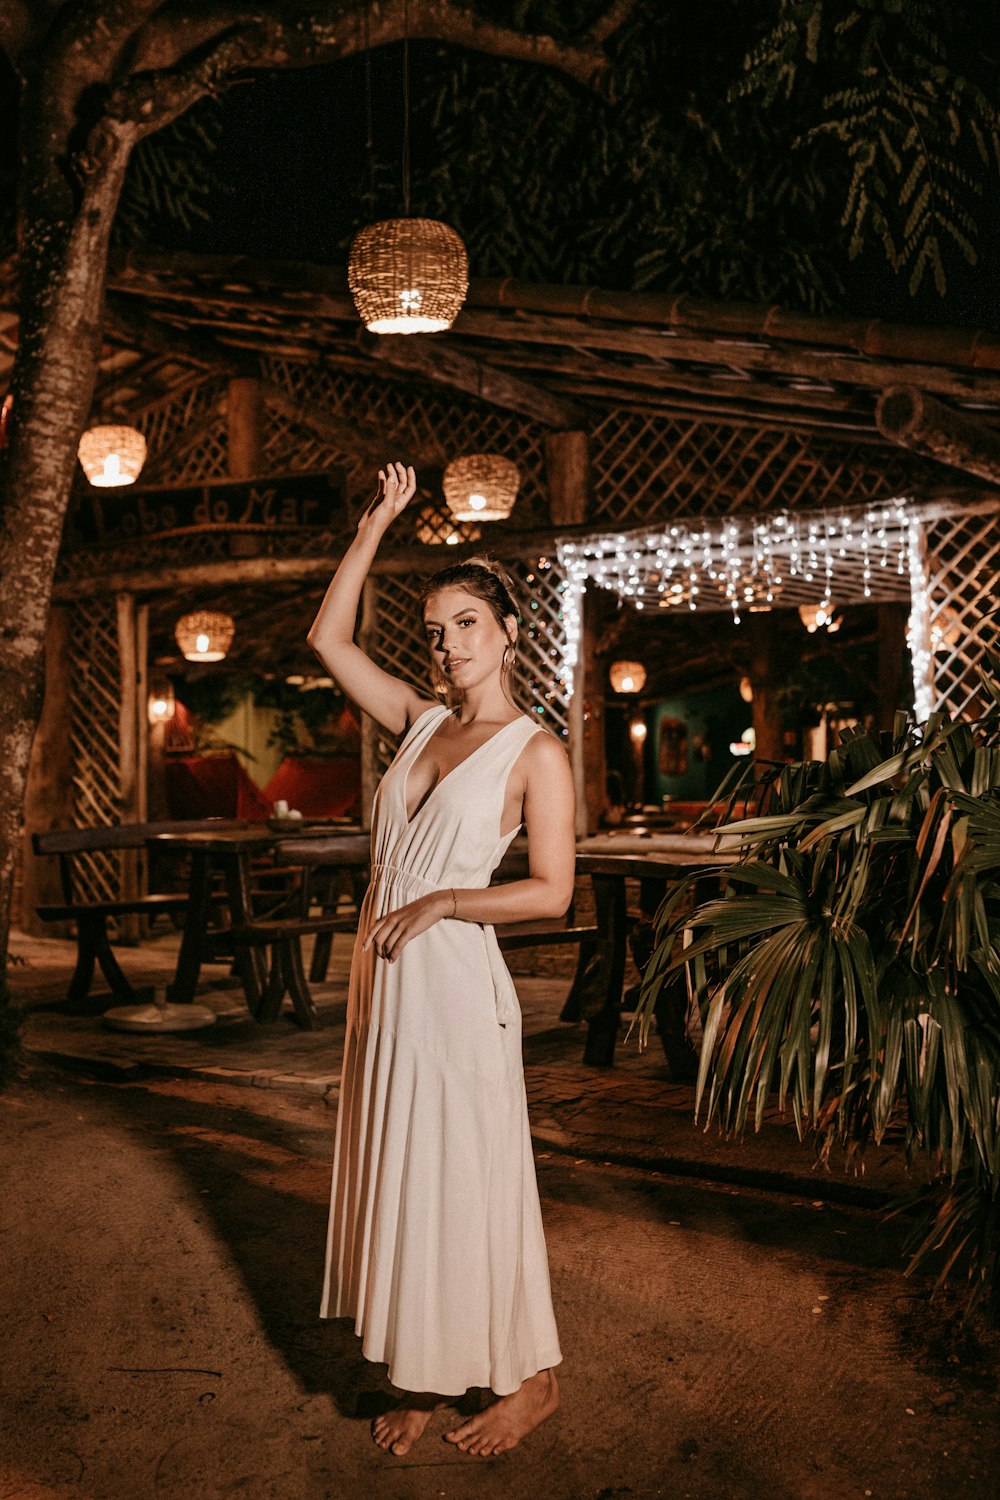 woman in white sleeveless dress standing near palm tree during night time